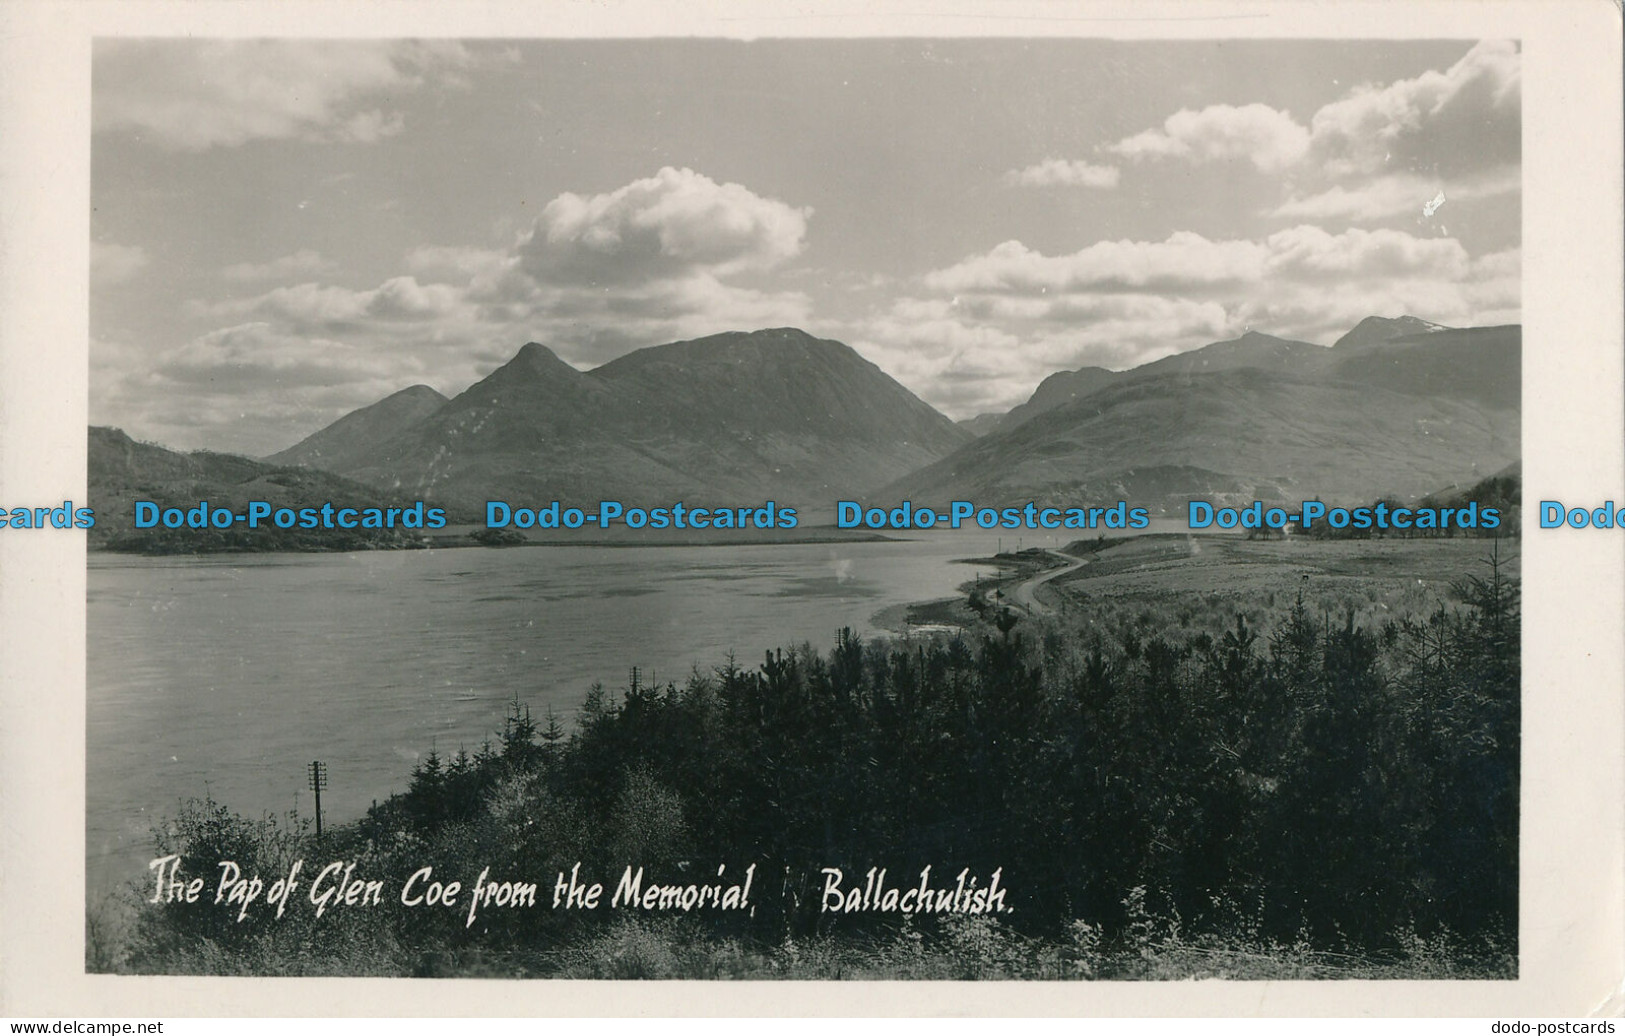 R024874 The Pap Of Glen Coe From The Memorial. Ballachulish. RP - World